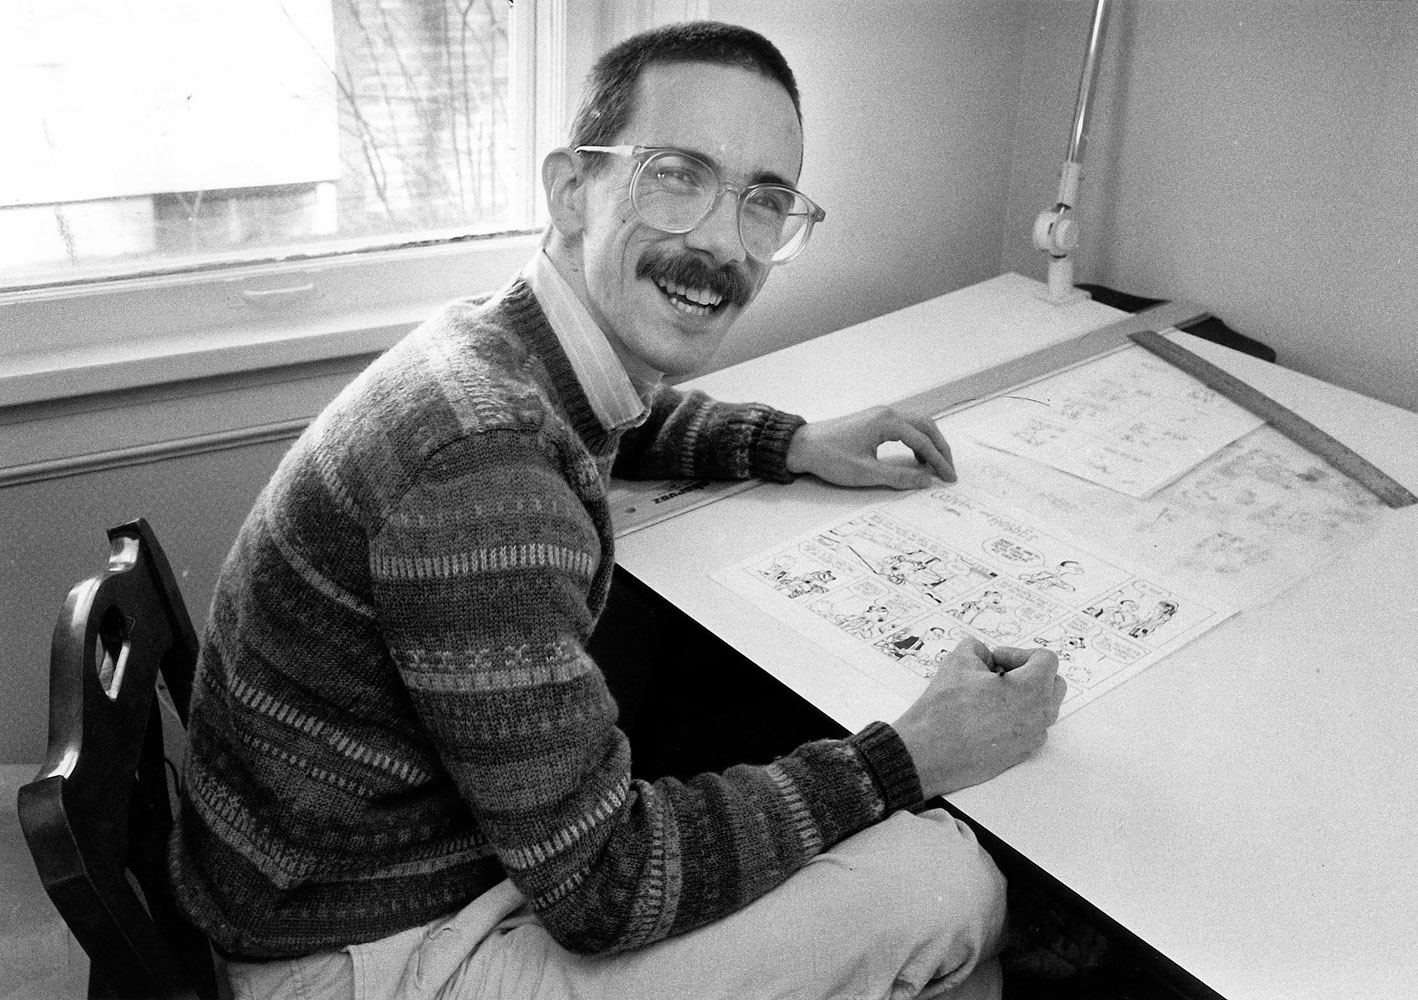 Bill Watterson, creator of the syndicated cartoon strip "Calvin &amp; Hobbes" is shown in this Feb. 24, 1986 file photo at his home in Chagrin Falls, Ohio. (C.H. Pete Copeland—The Plain Dealer/AP)